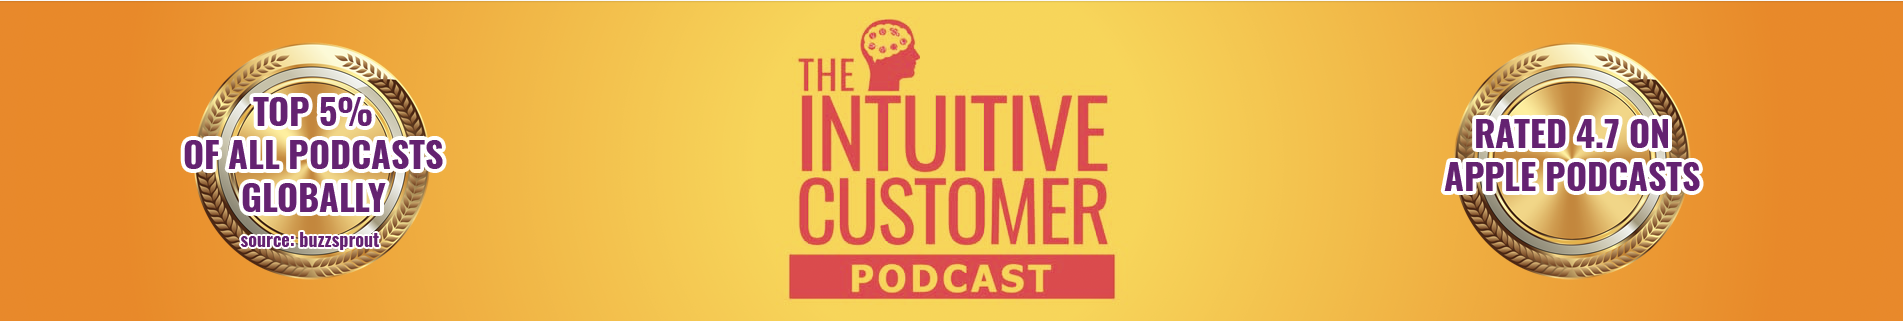 CX-podcasts: The intuitive customer